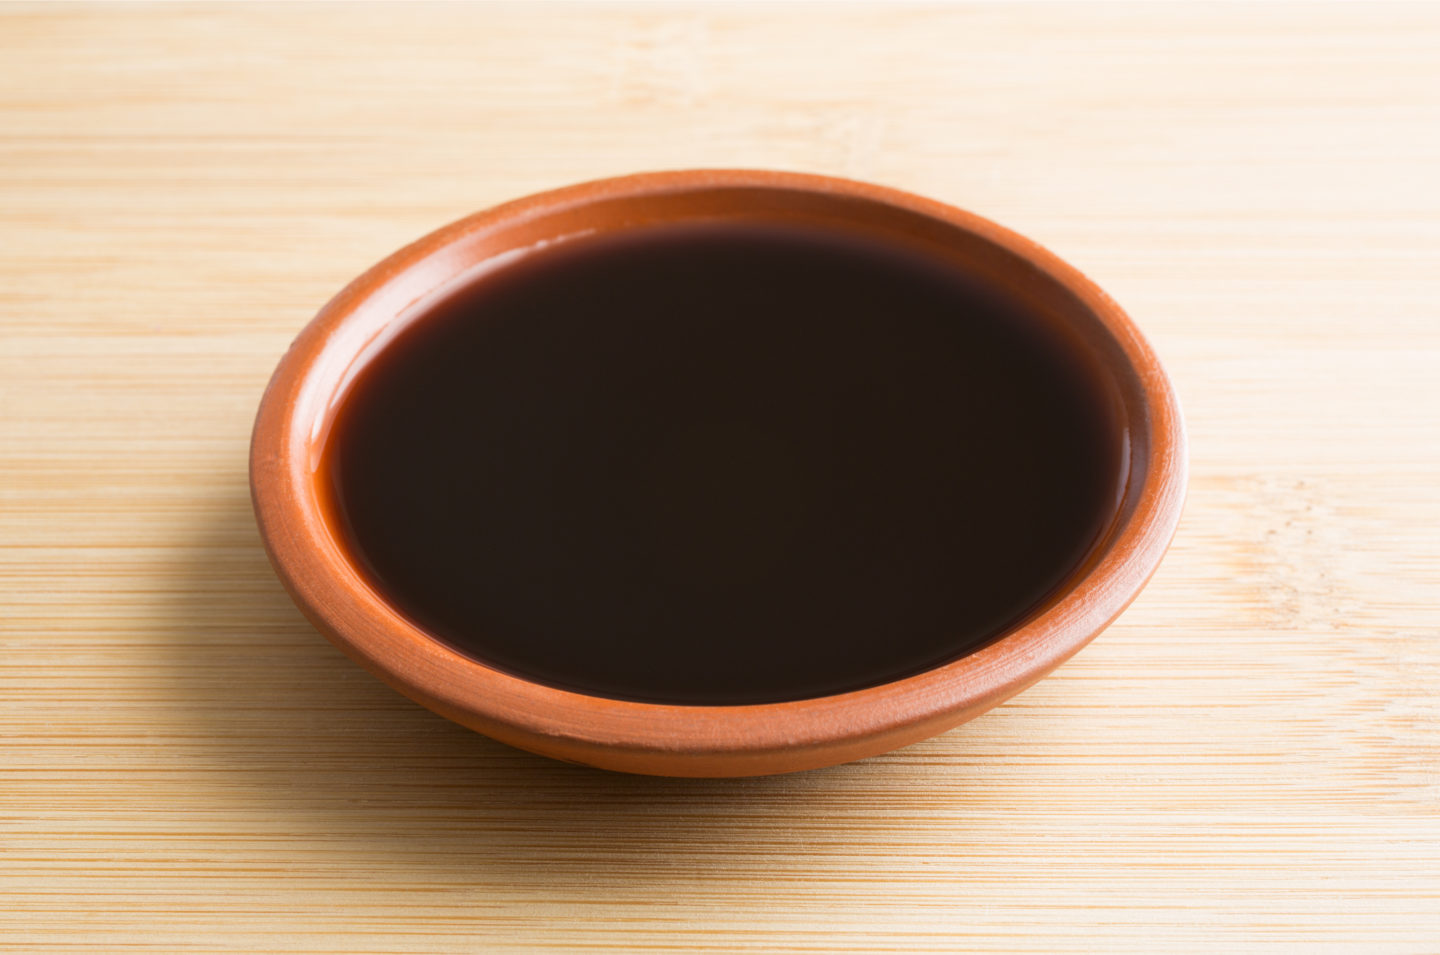 liquid smoke in a small wooden bowl